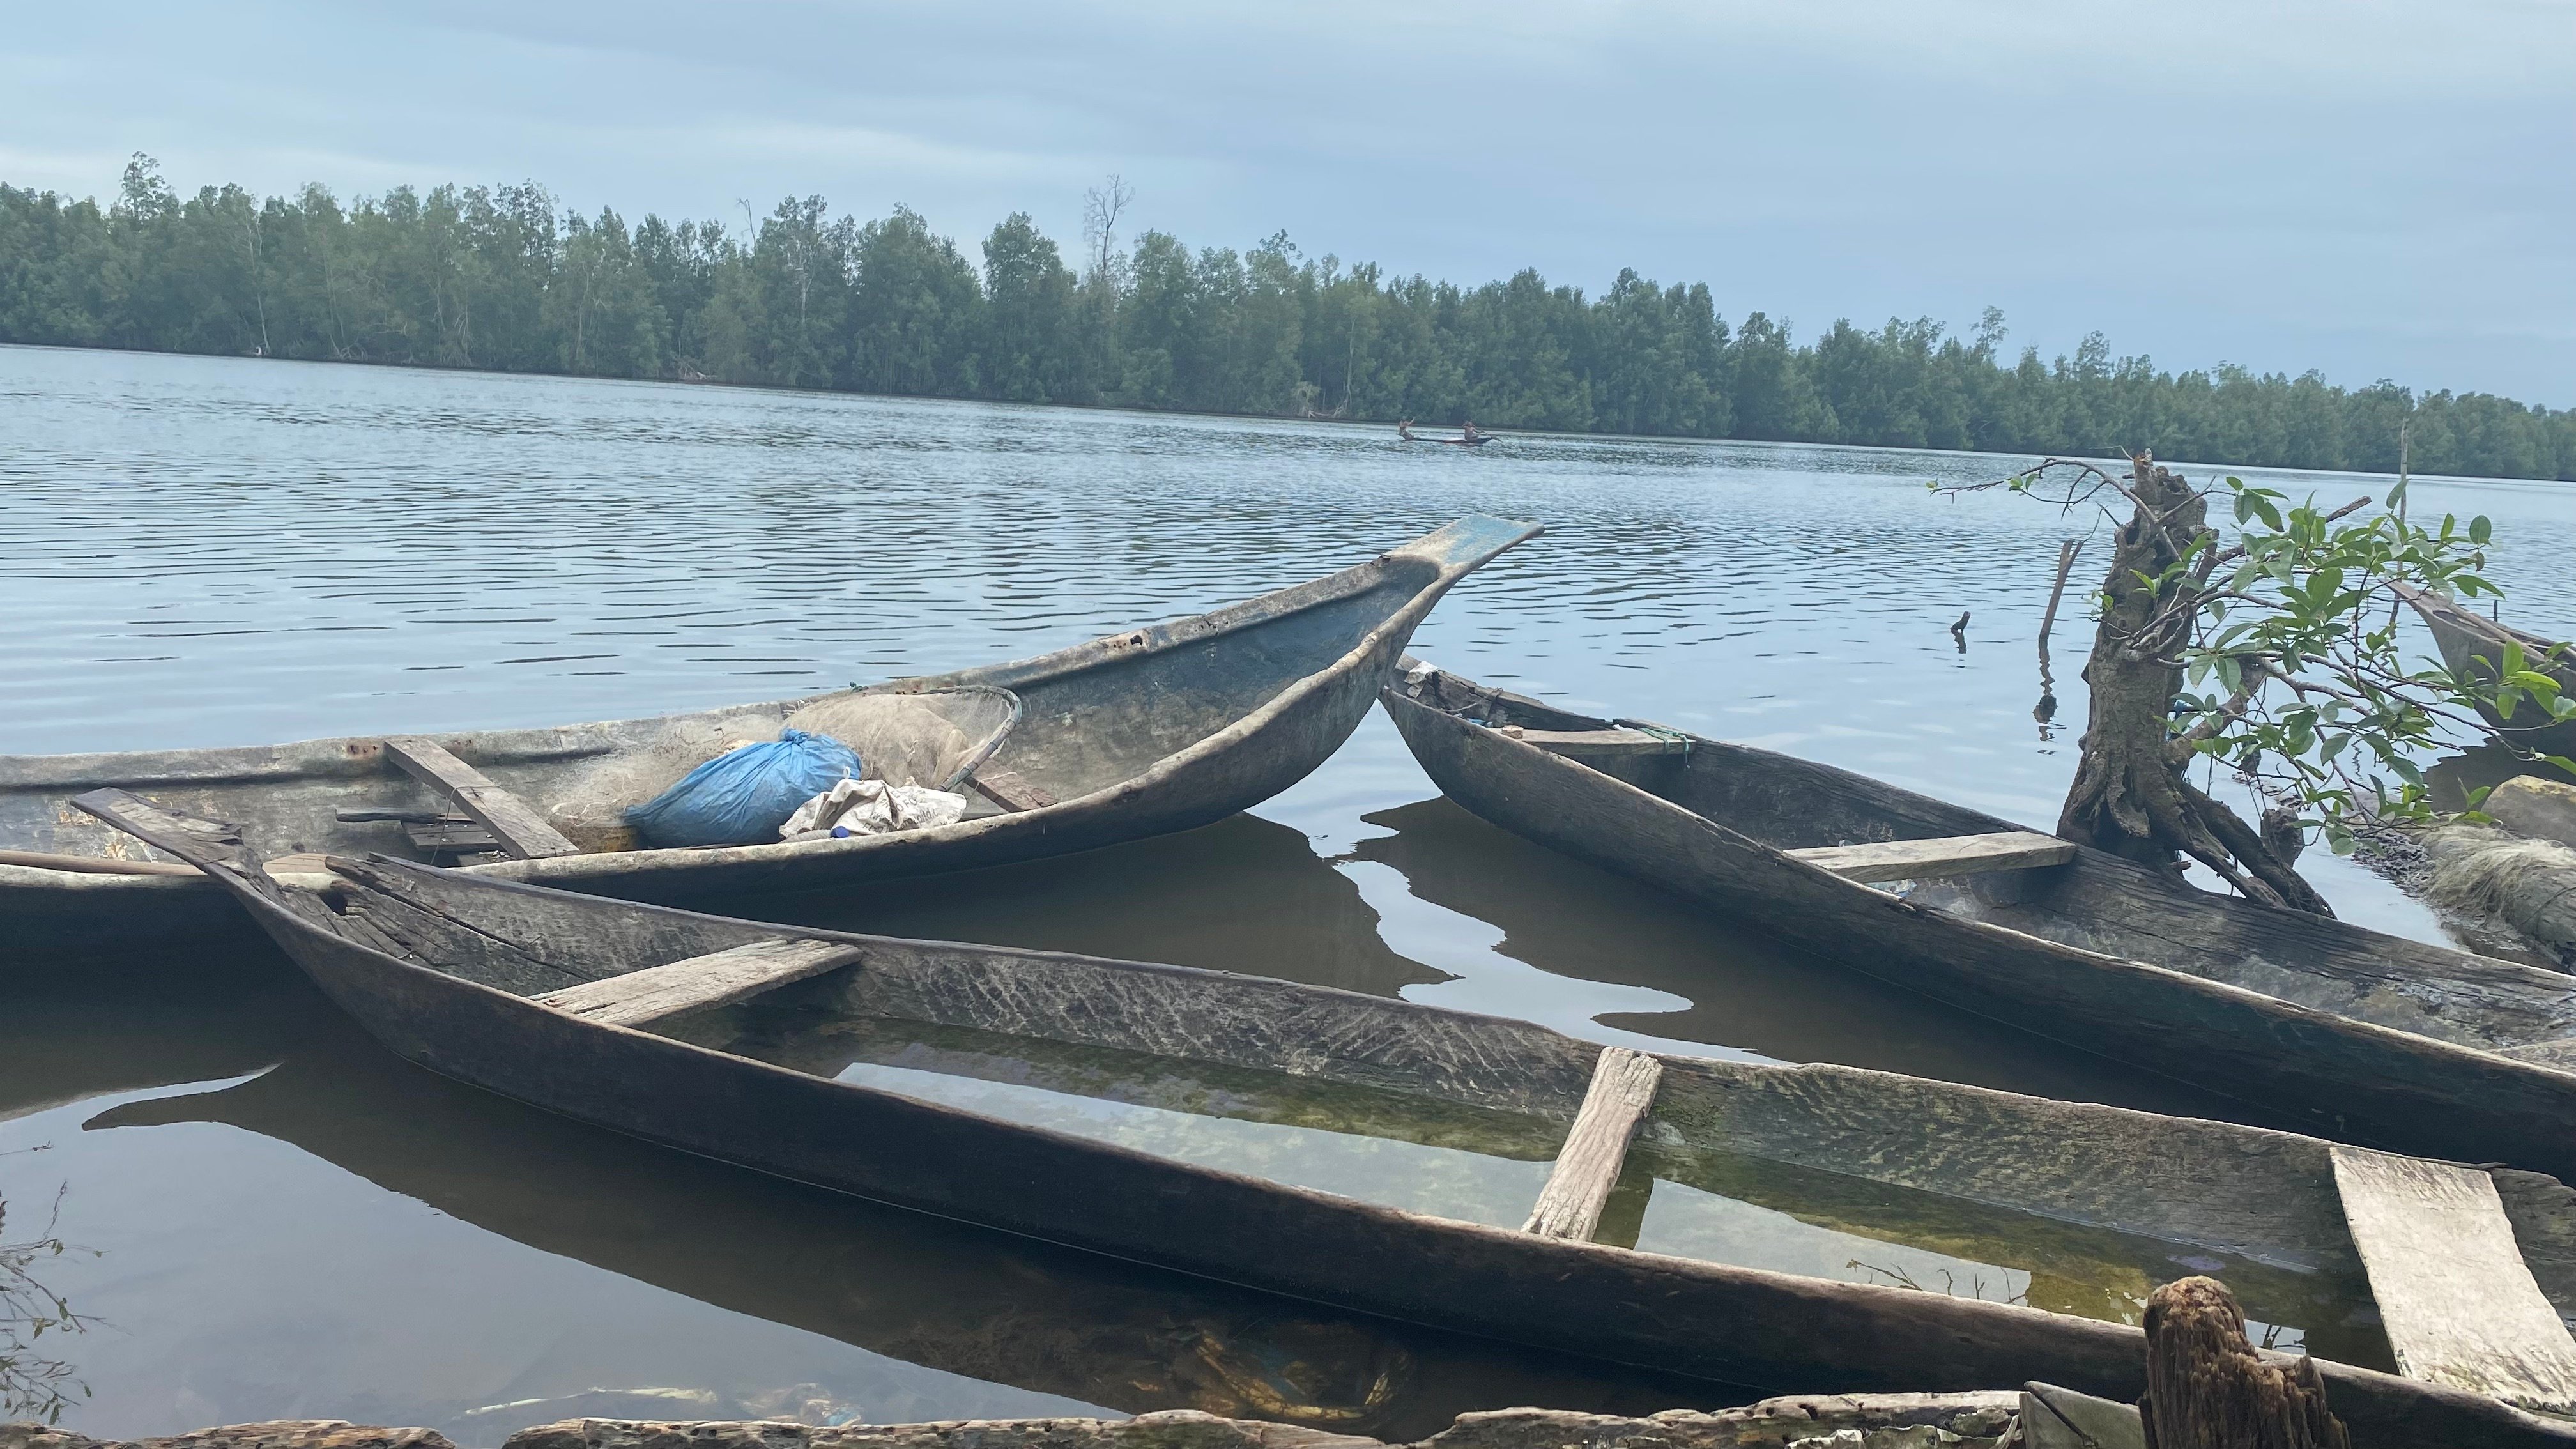 Fishing is a major source of livelihood for Nembe people. Photo: Justice Nwafor  https://tribuneonlineng.com/in-niger-delta-communities-oil-spill-is-impoverishing-residents-devastating-environment-dislocating-cultures/